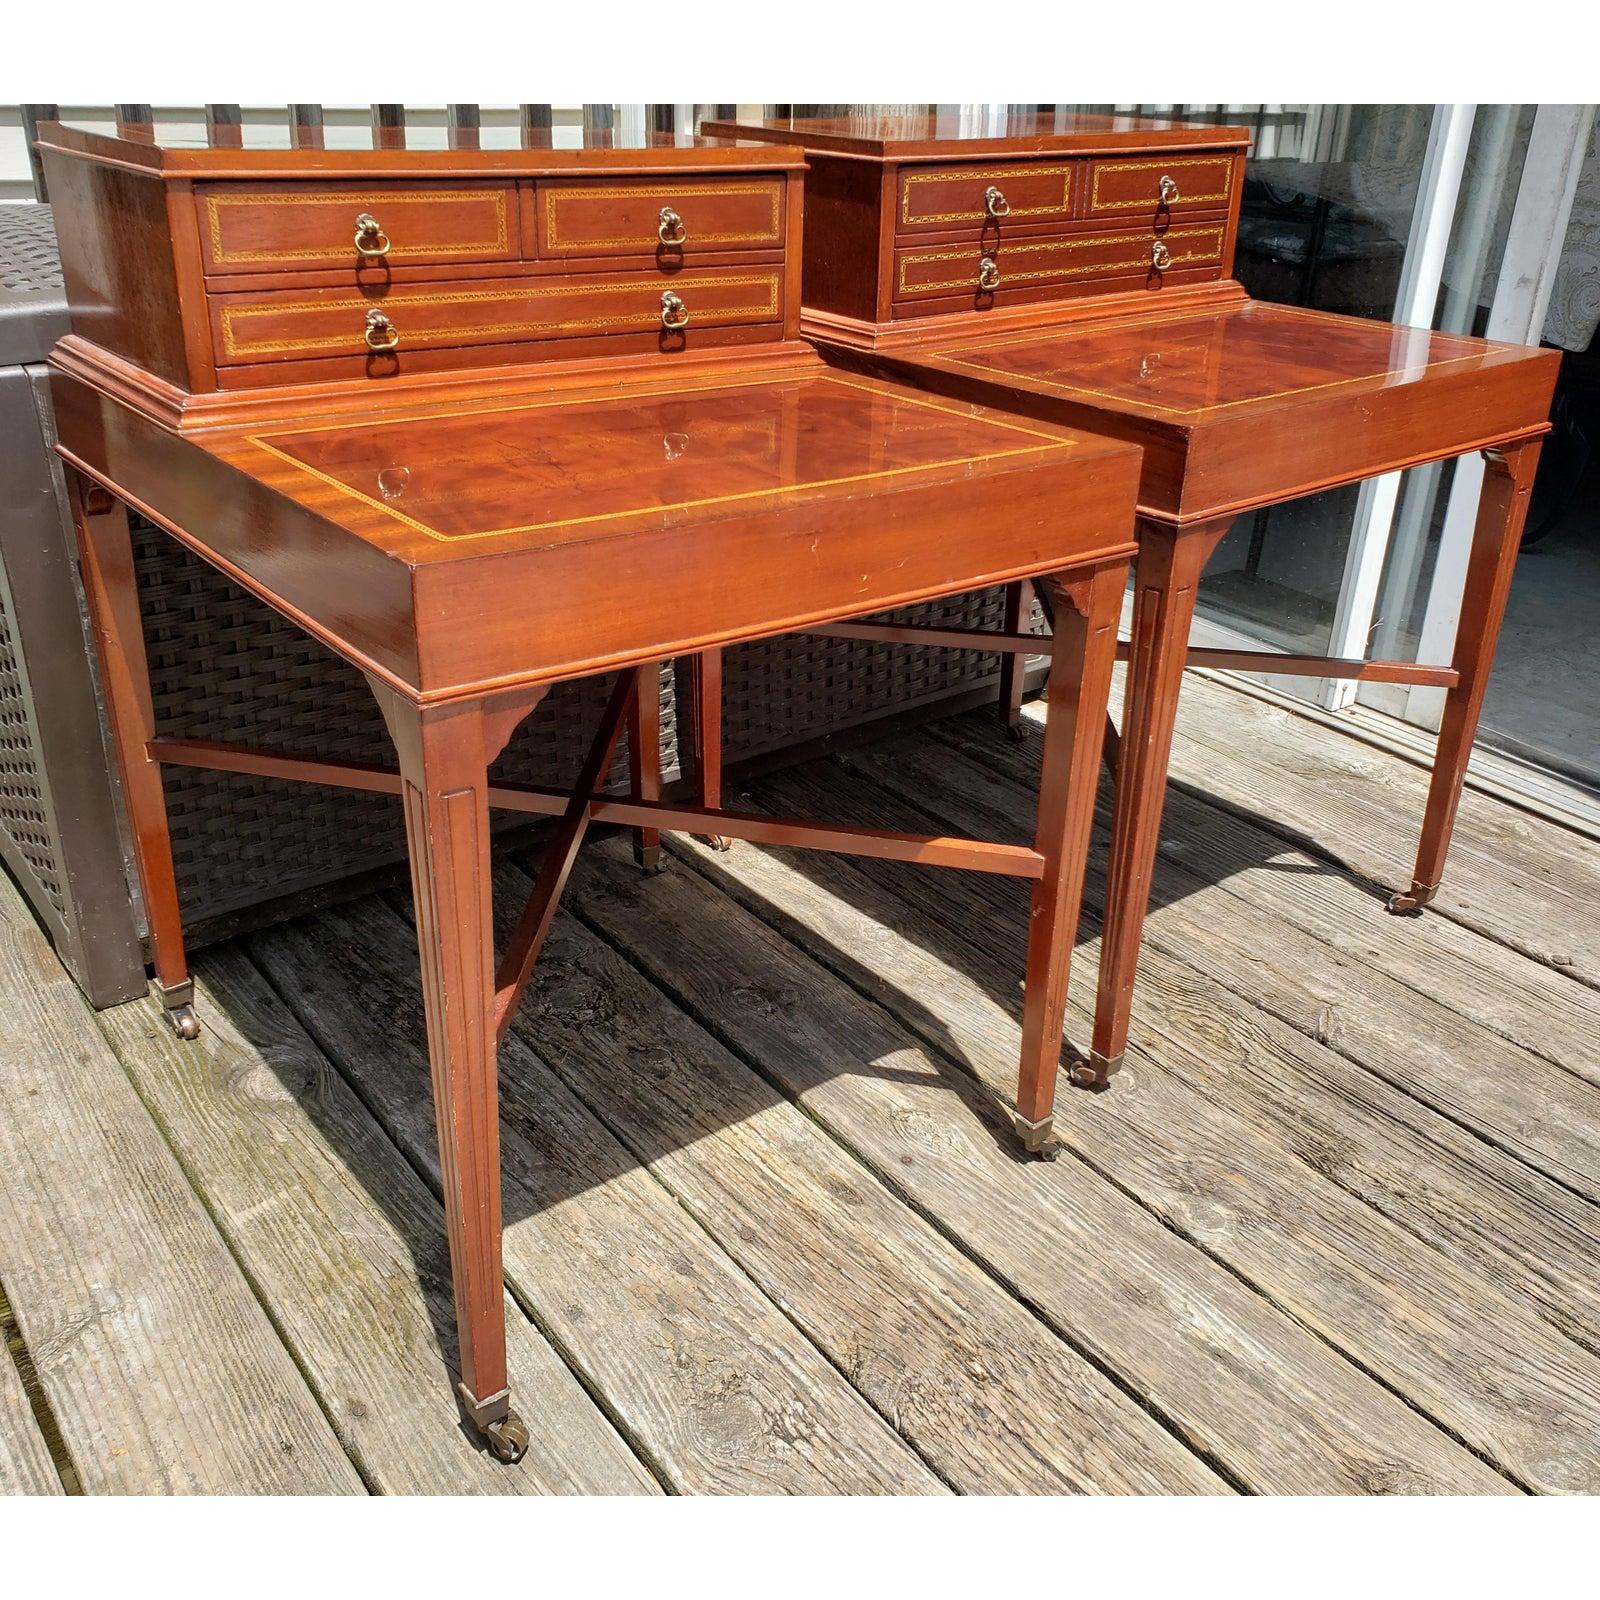 Antique Flame mahogany inlaid satinwood banded 2 tier side tables end tables. Brass capped feet over brass wheels. One oversized dovetailed drawer with 4 drawer pulls. Very sturdy pair of tables with cross bars underneath for greater stability. The